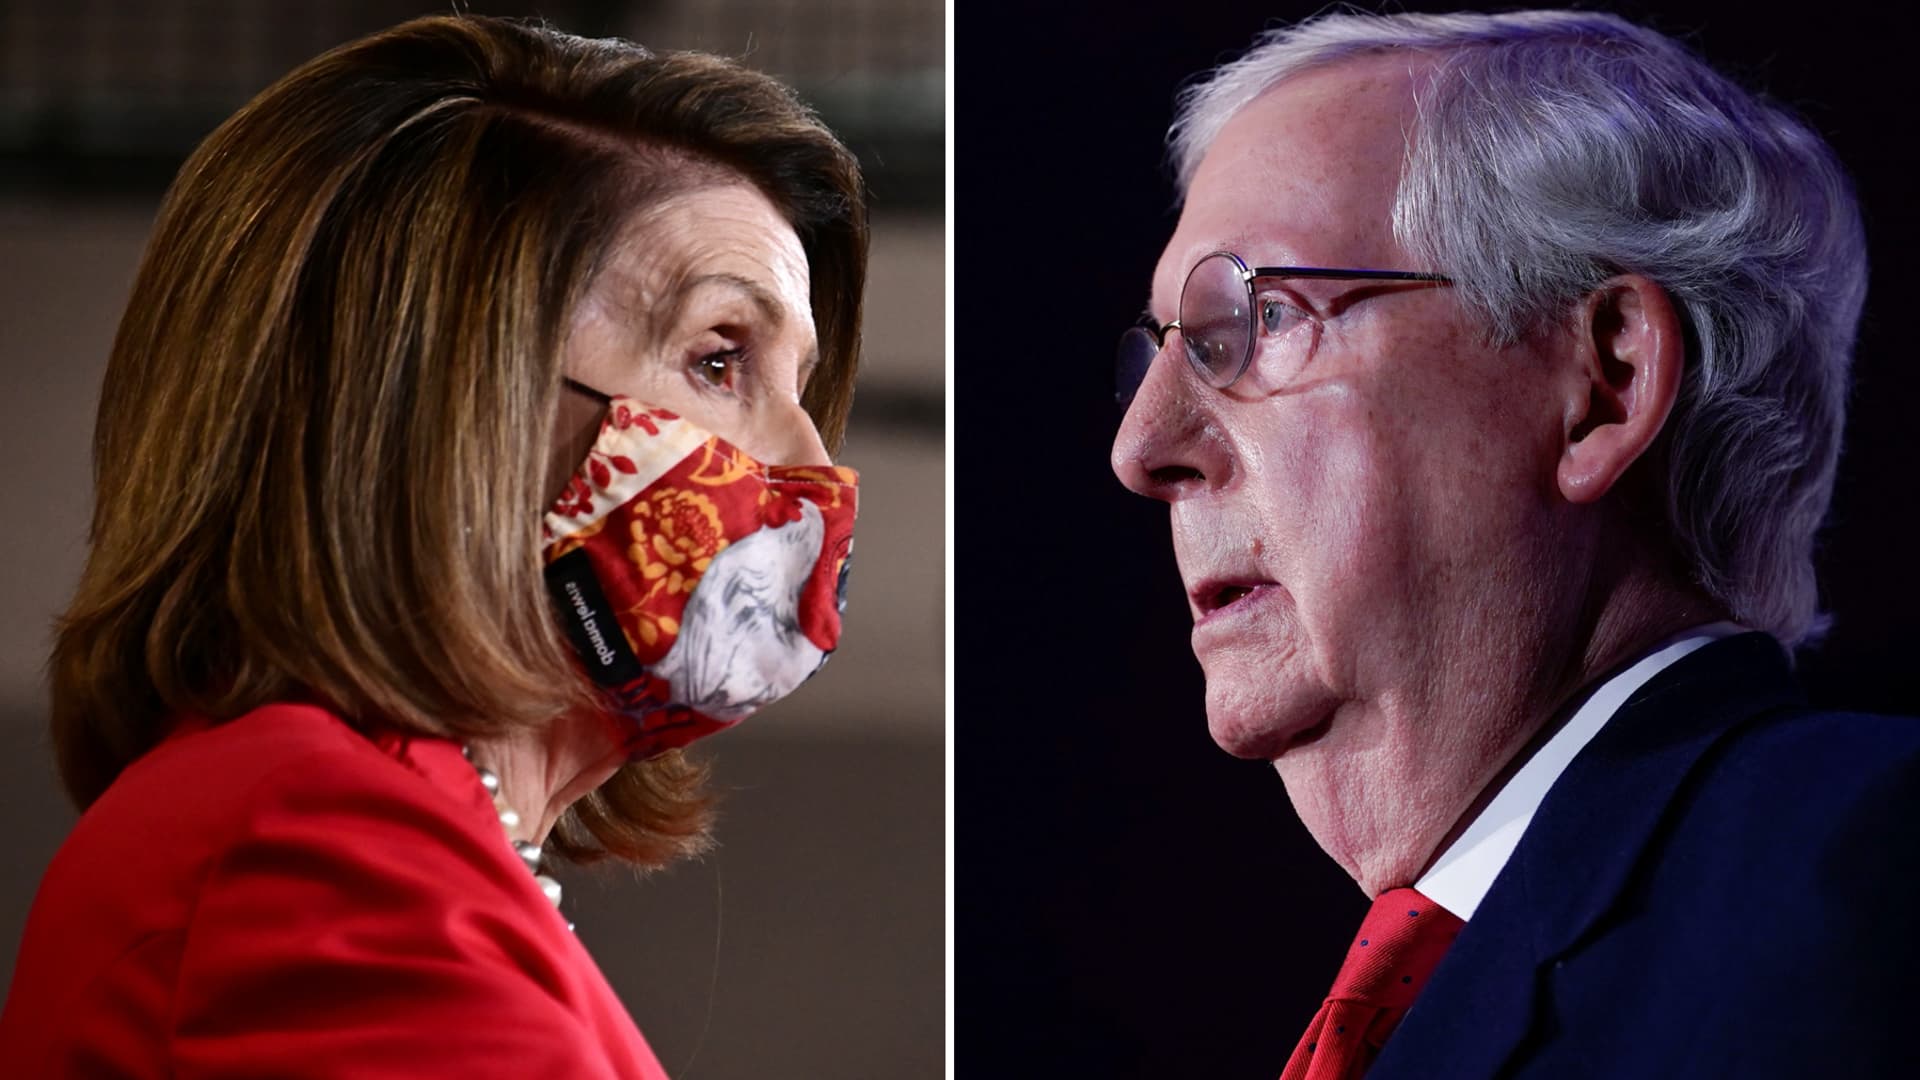 Speaker of the House Nancy Pelosi and Senate Majority Leader Mitch McConnell.